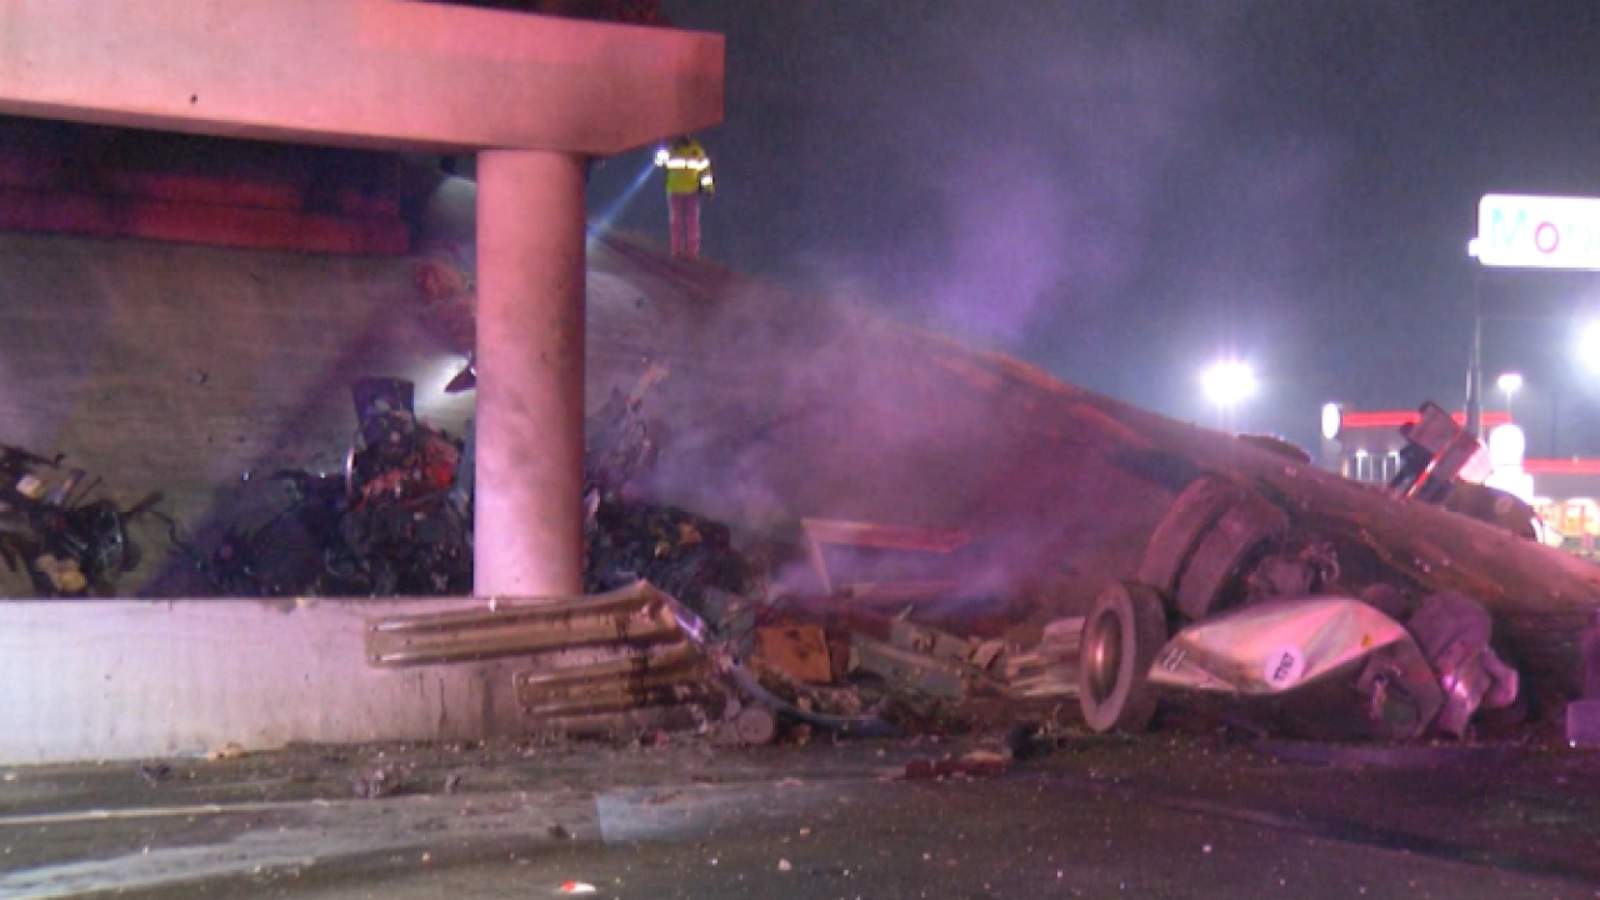 Driver of 18-wheeler killed in fiery crash on South Side, police say